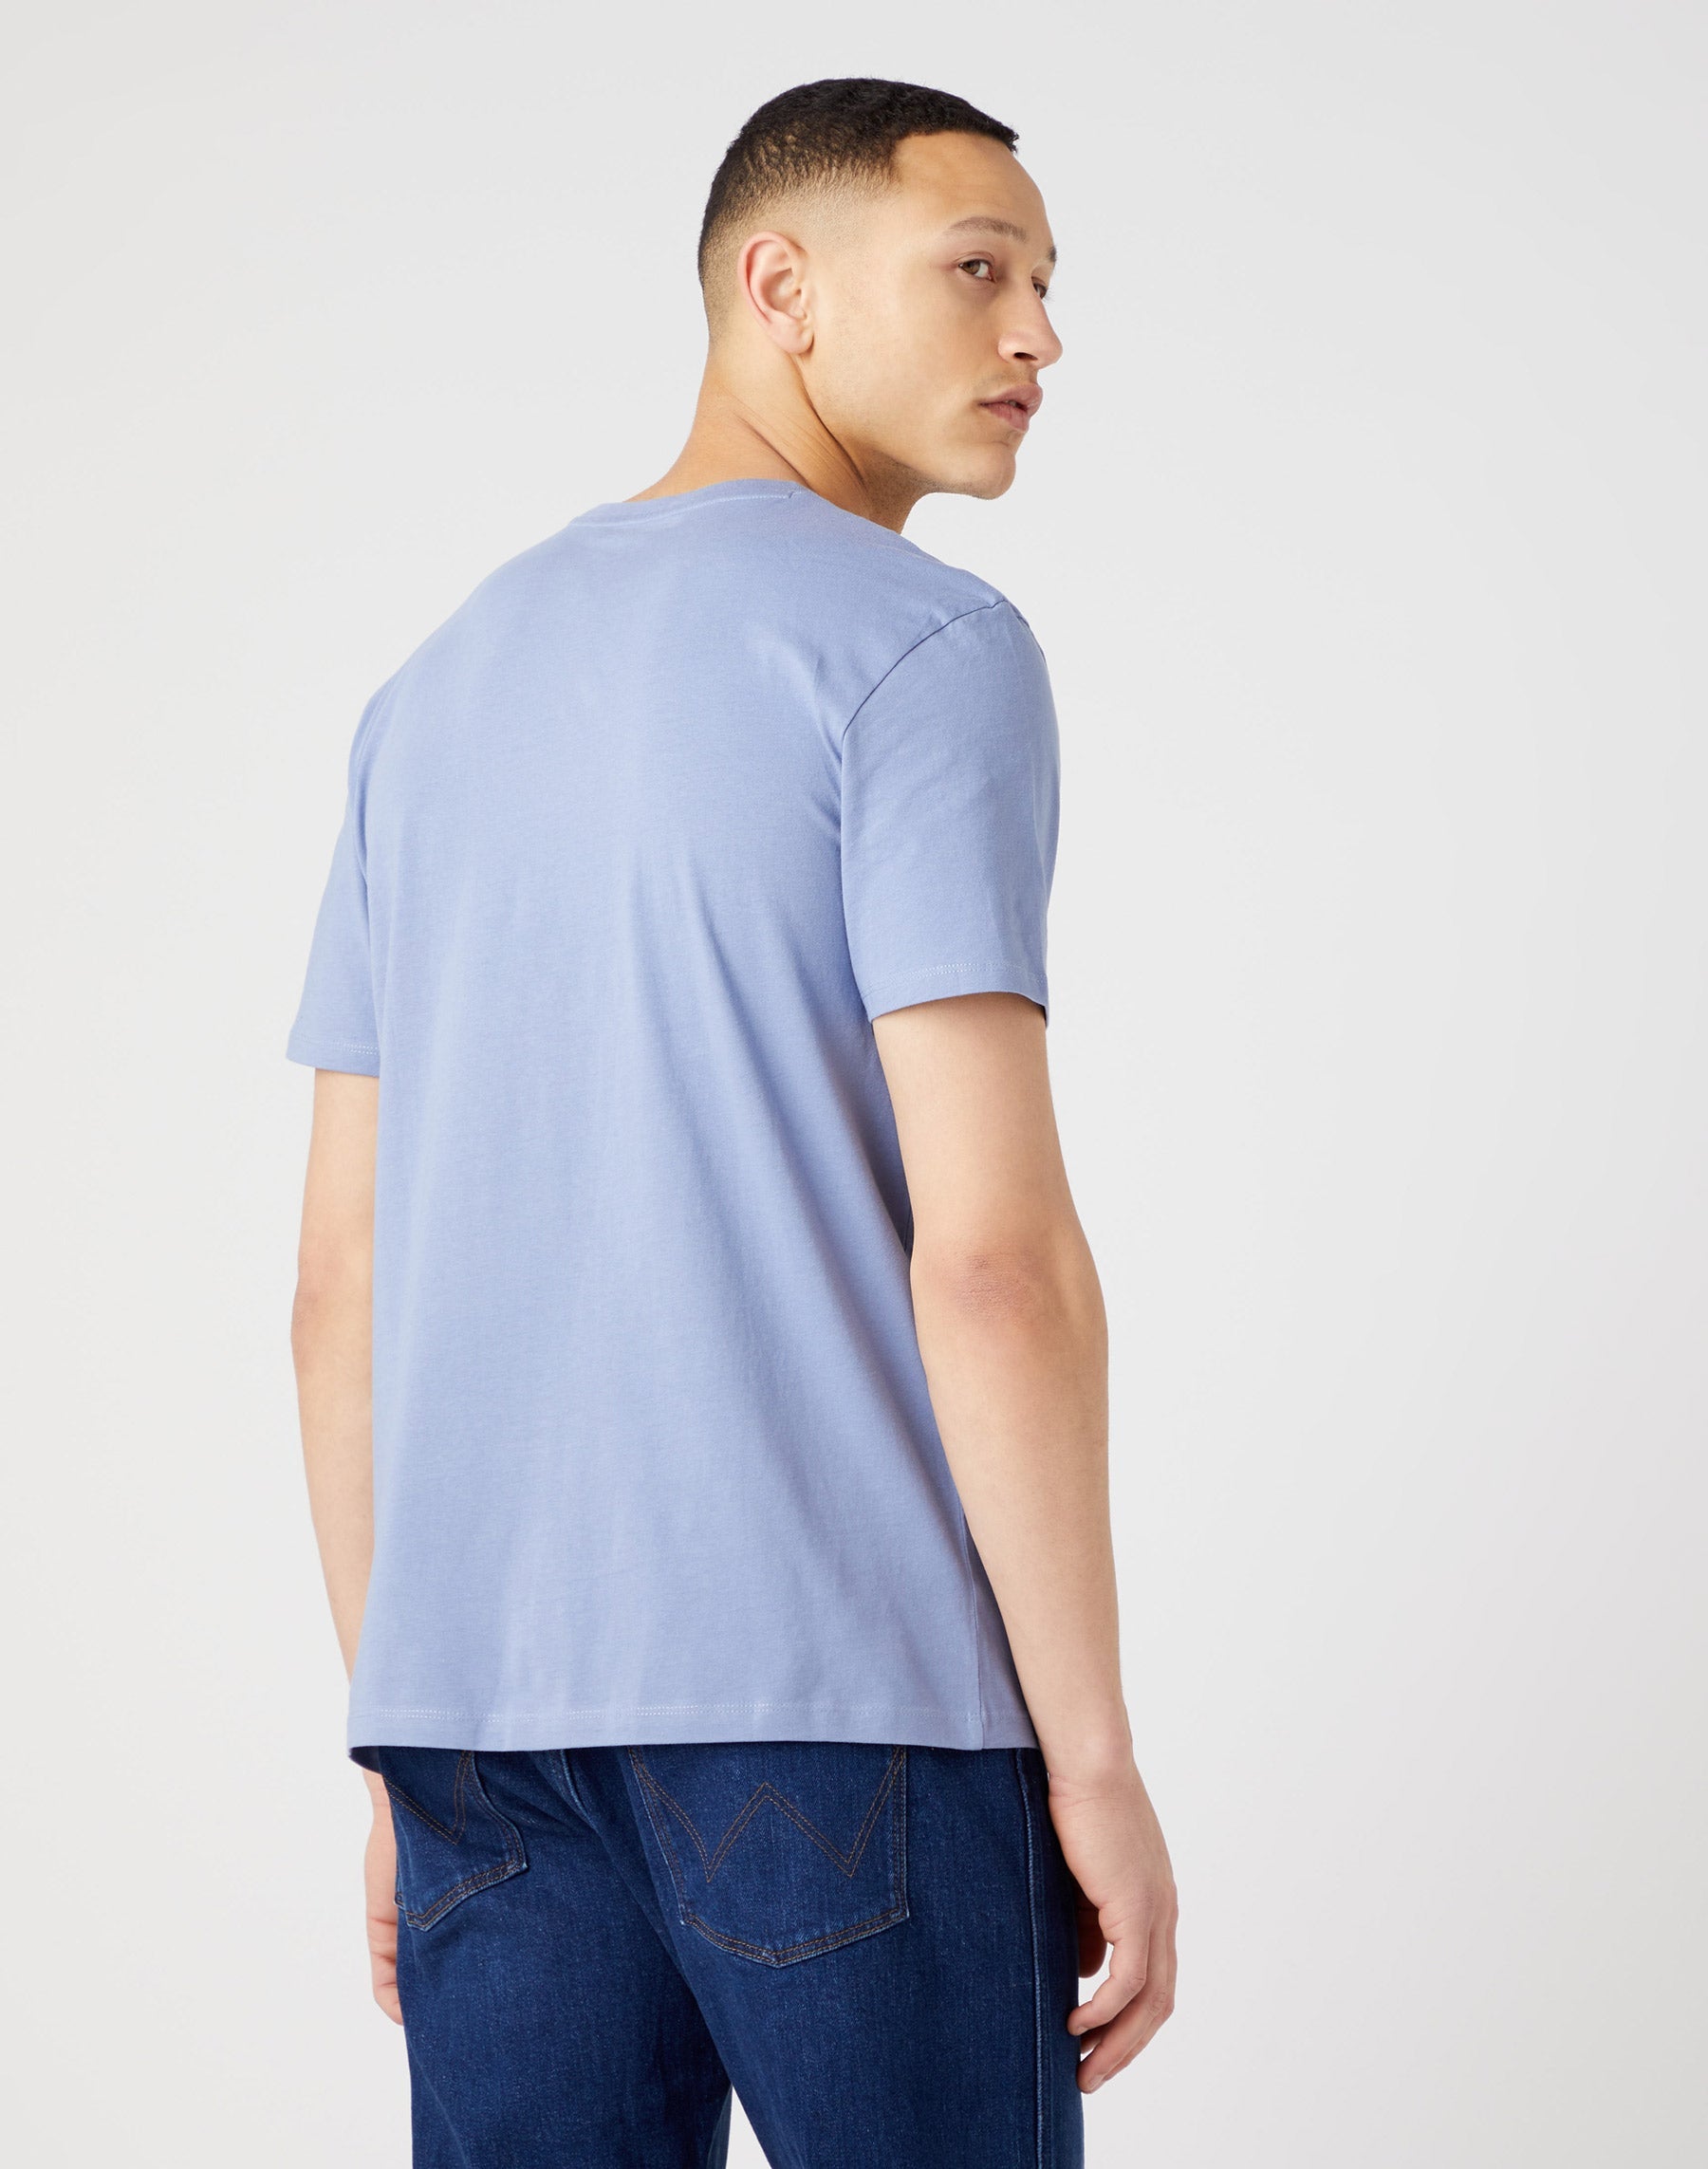 Sign Off Tee in Stone Wash Blue T-Shirts Wrangler   